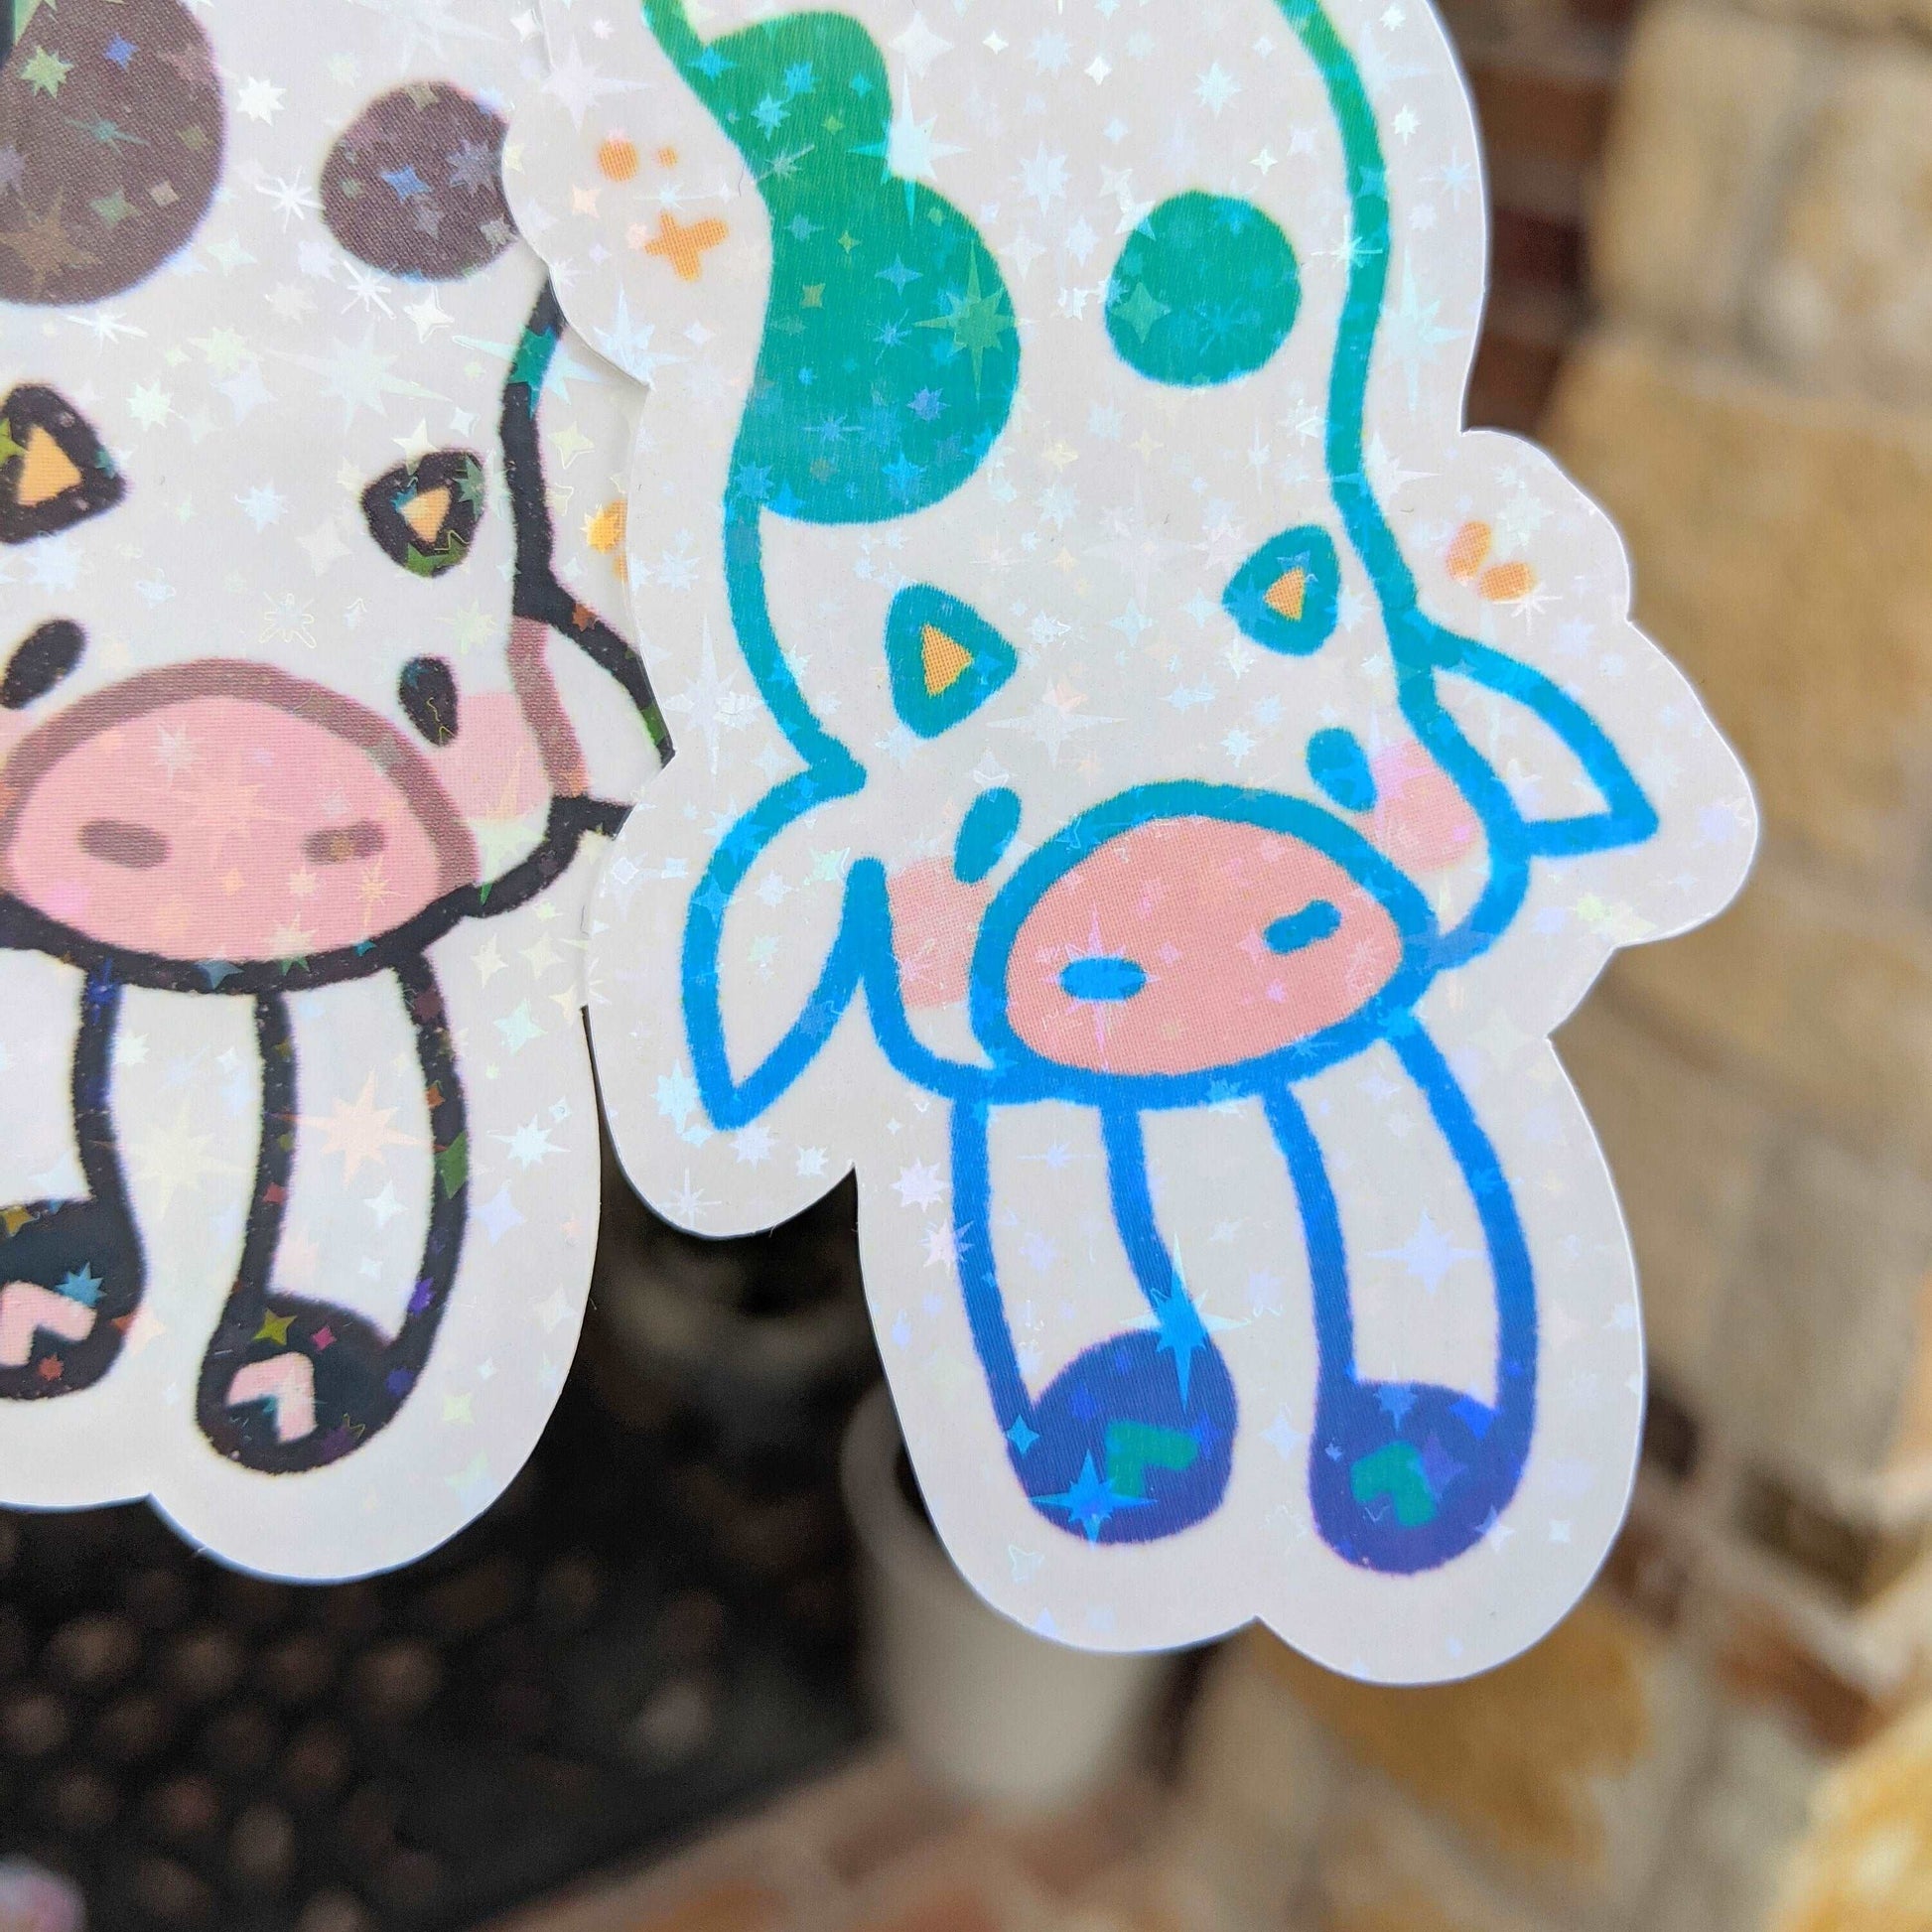 MORE Sparkly Long Cow Stickers!